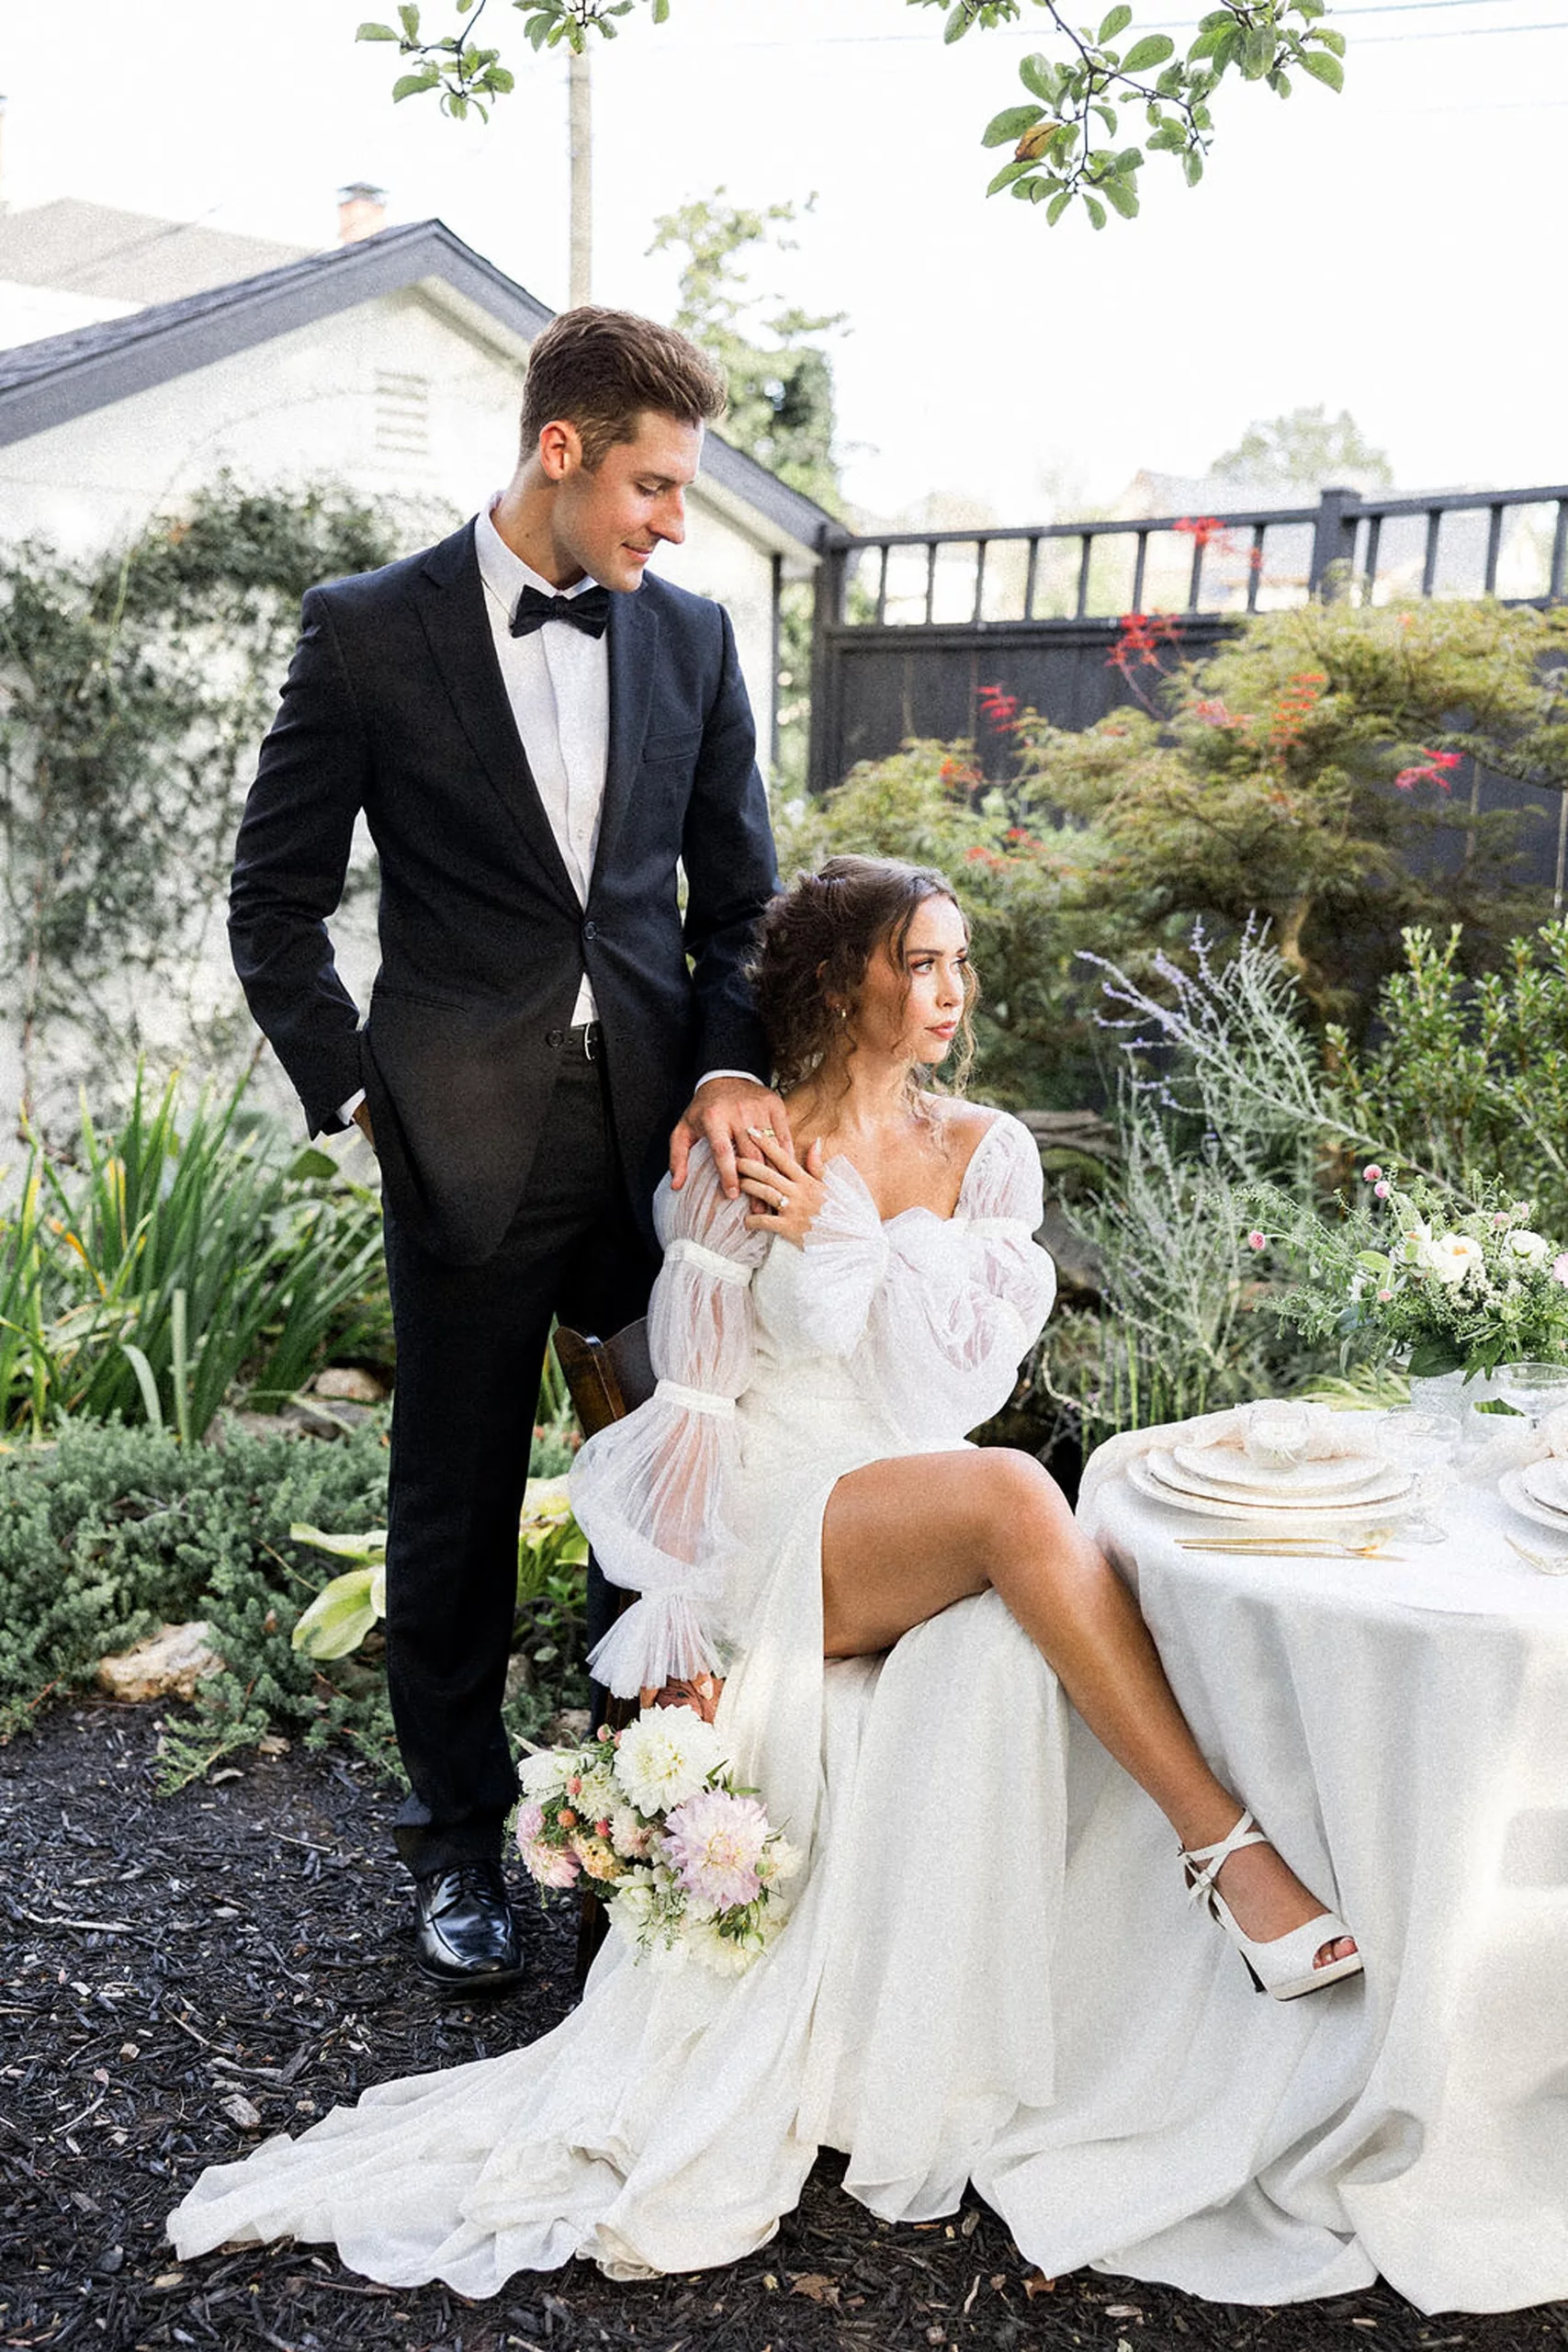 A bride sits in a chair with legs crossed as her husband stands behind her with a hand on her shoulder in a garden